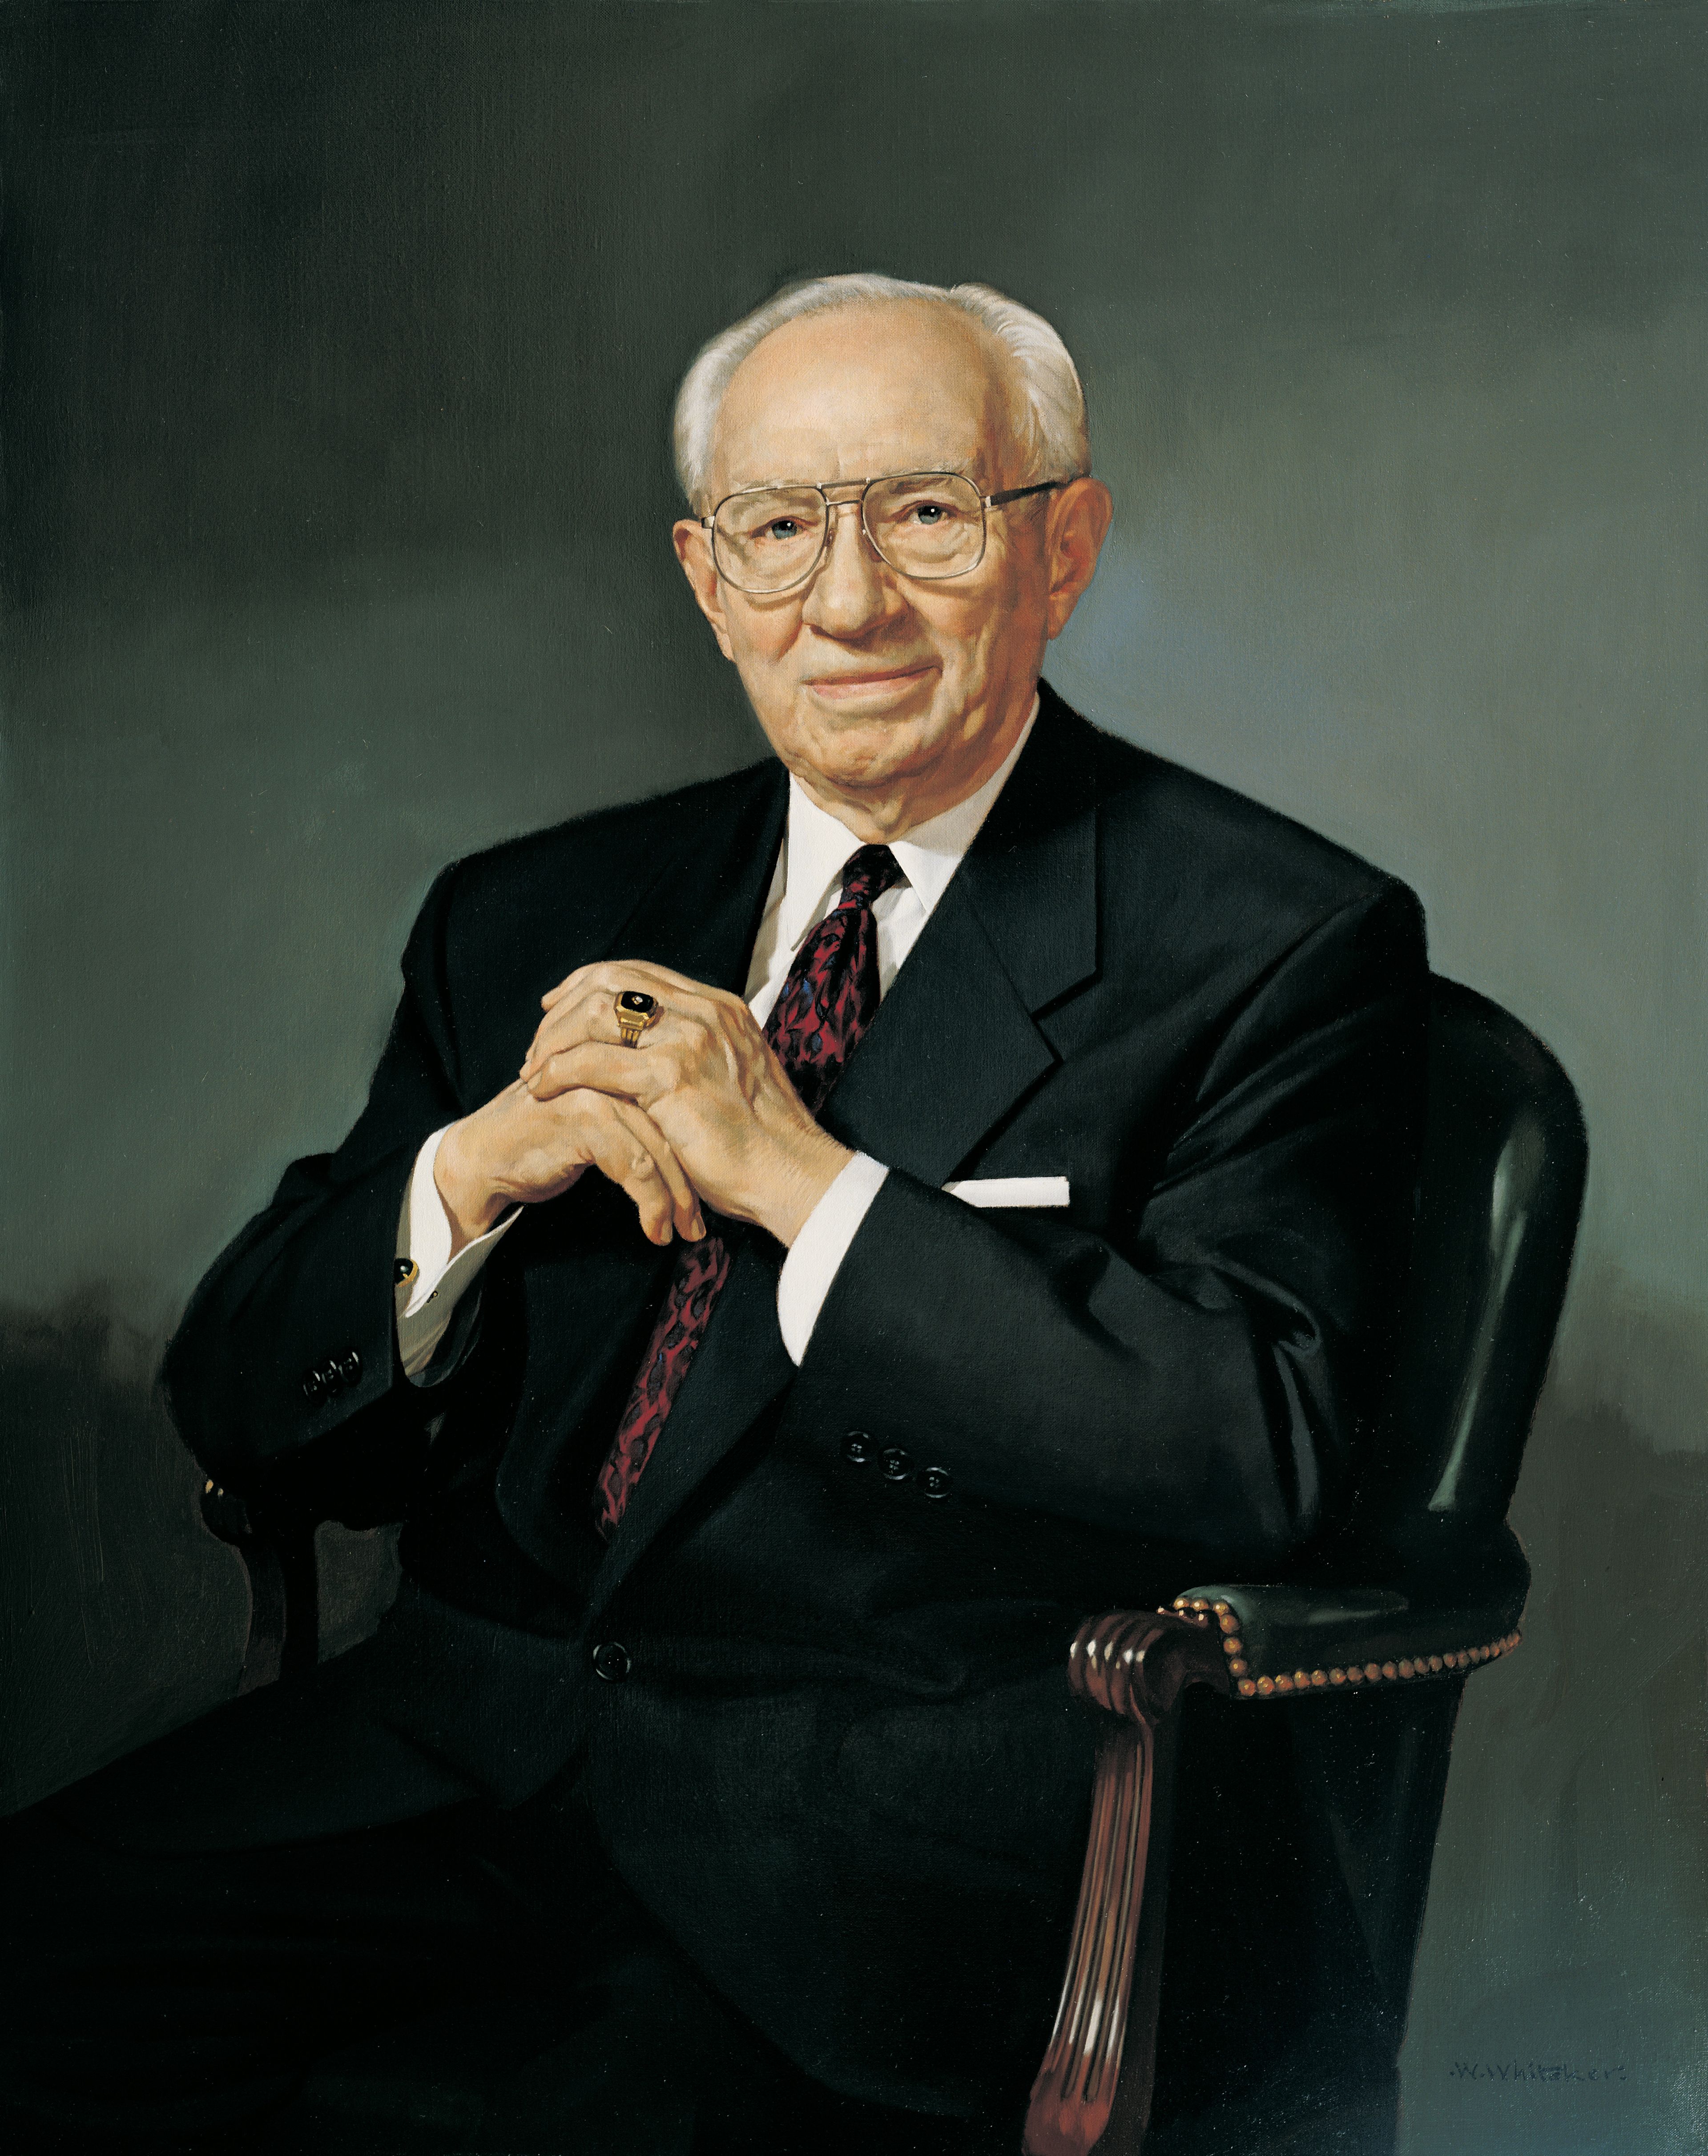 A portrait of Gordon B. Hinckley, who was the 15th President of the Church from 1995 to 2008; painted by William F. Whitaker Jr.